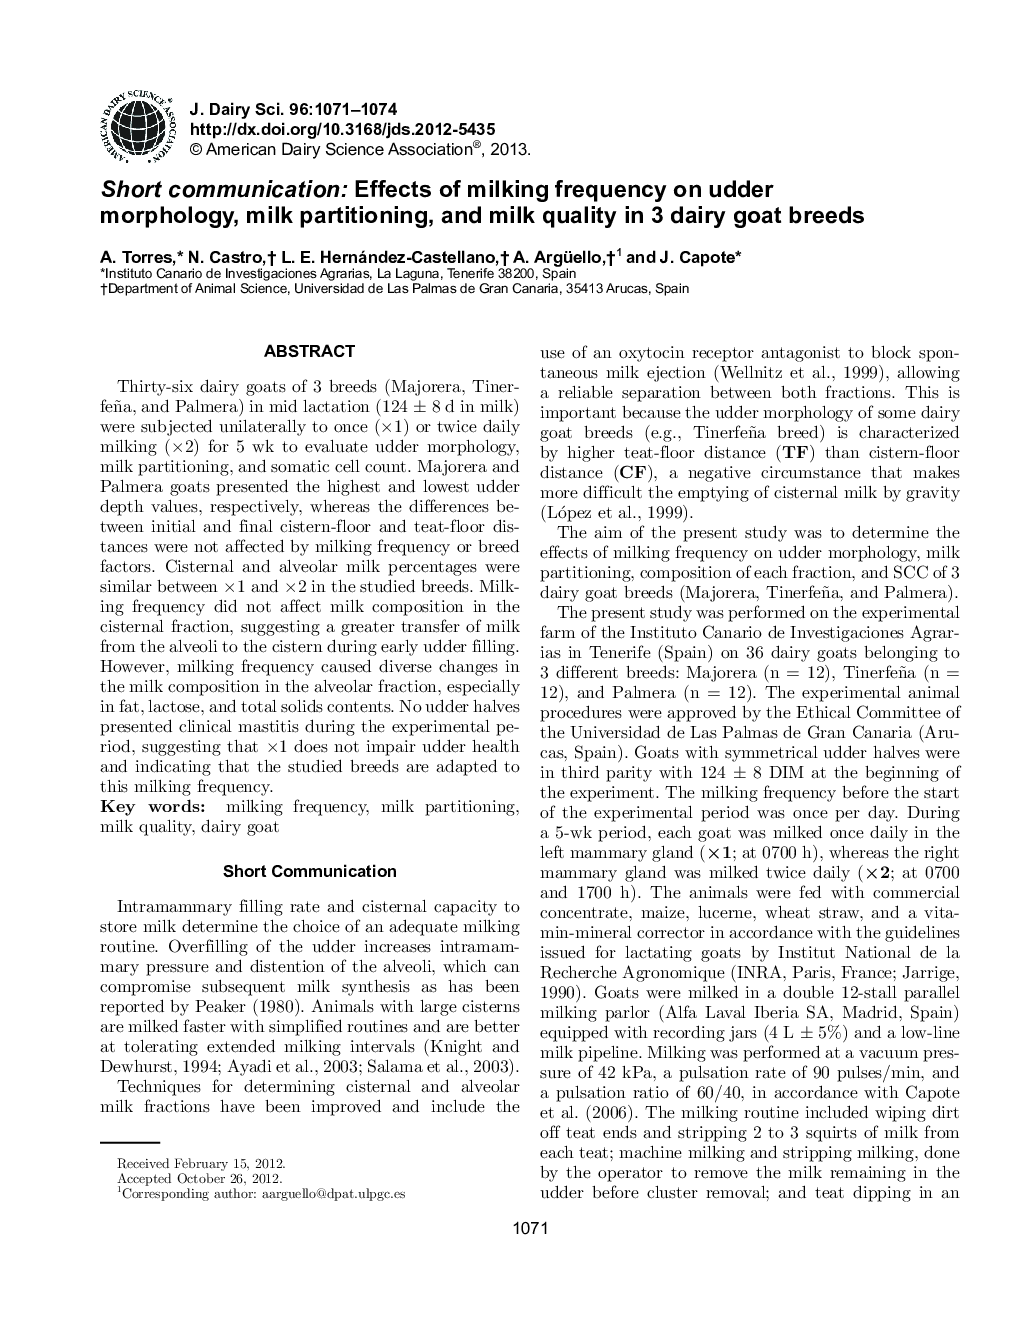 Short communication: Effects of milking frequency on udder morphology, milk partitioning, and milk quality in 3 dairy goat breeds